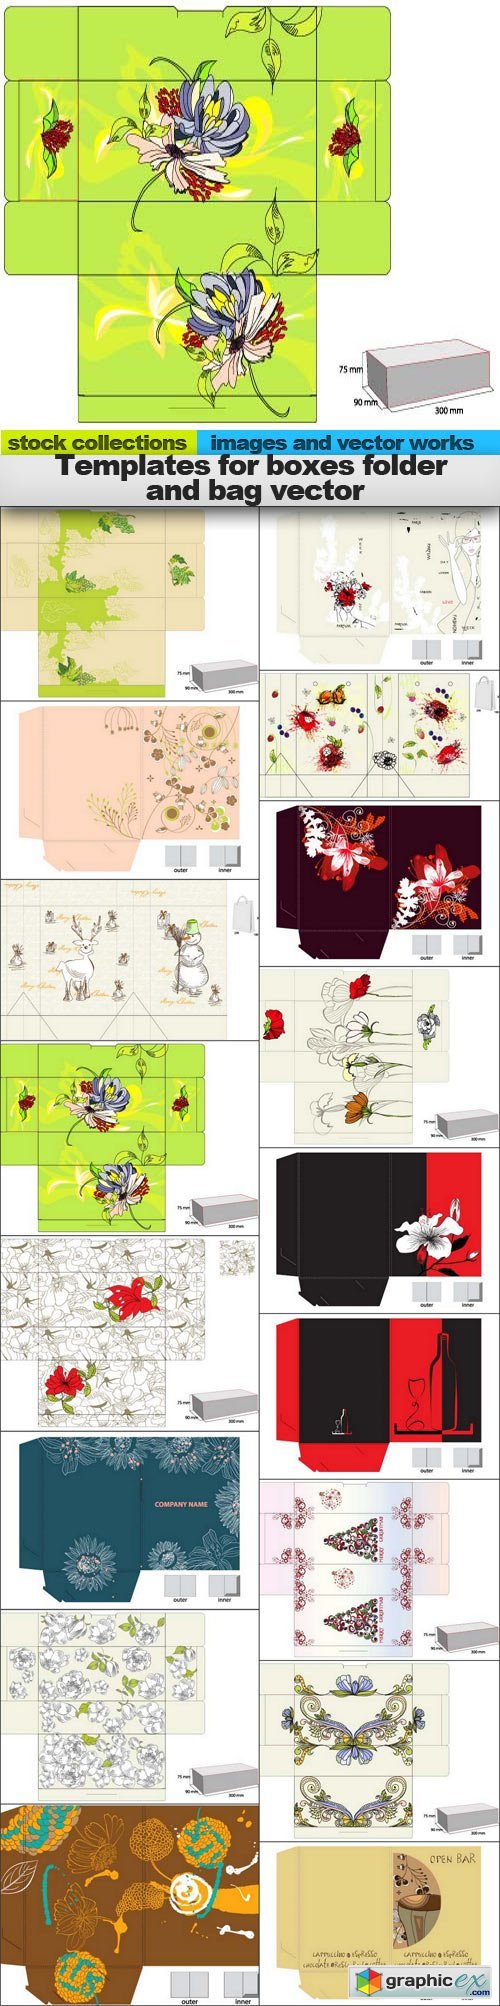 Templates for boxes folder and bag vector, 17 x EPS